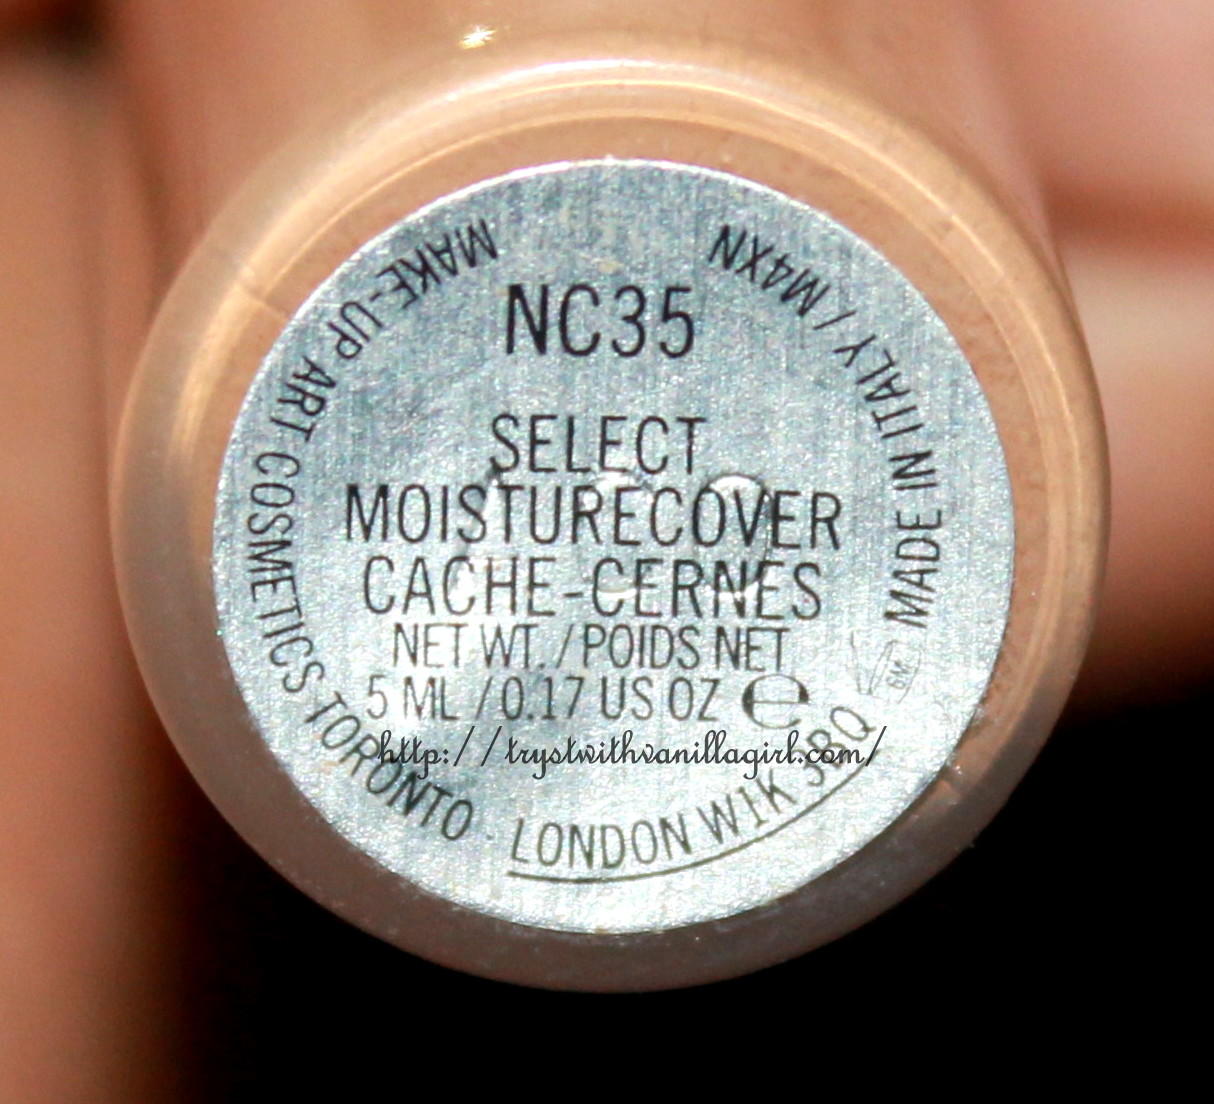 MAC Select Moisture Cover Concealer NC 35 Review,Swatch,Demo,Price